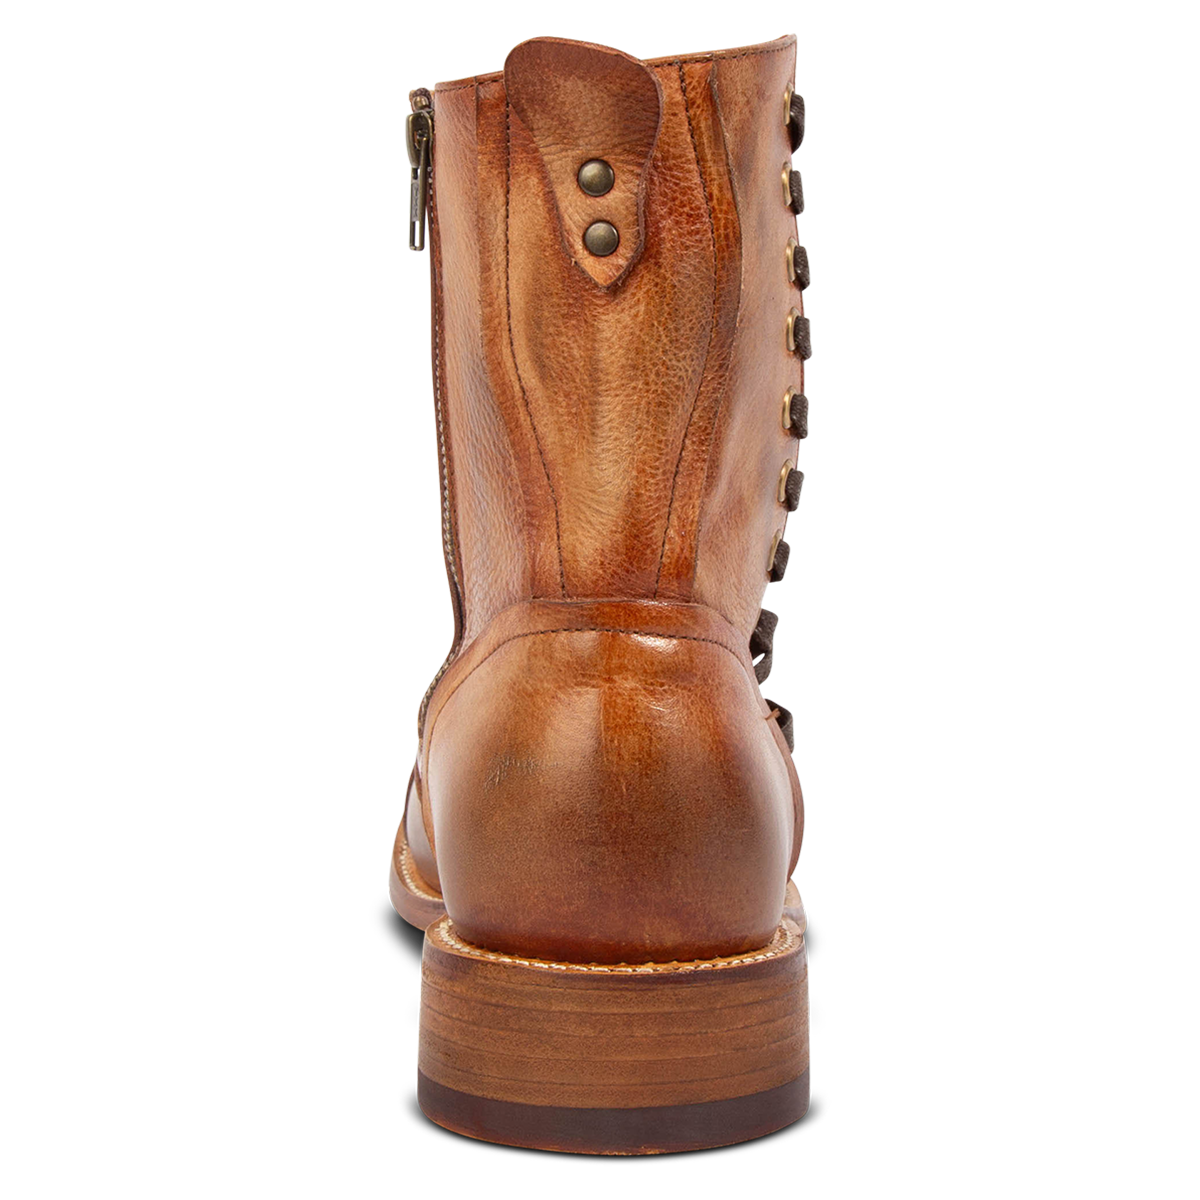 Back view showing studded paneling and low block heel on FREEBIRD men's Brooks Cognac leather boot